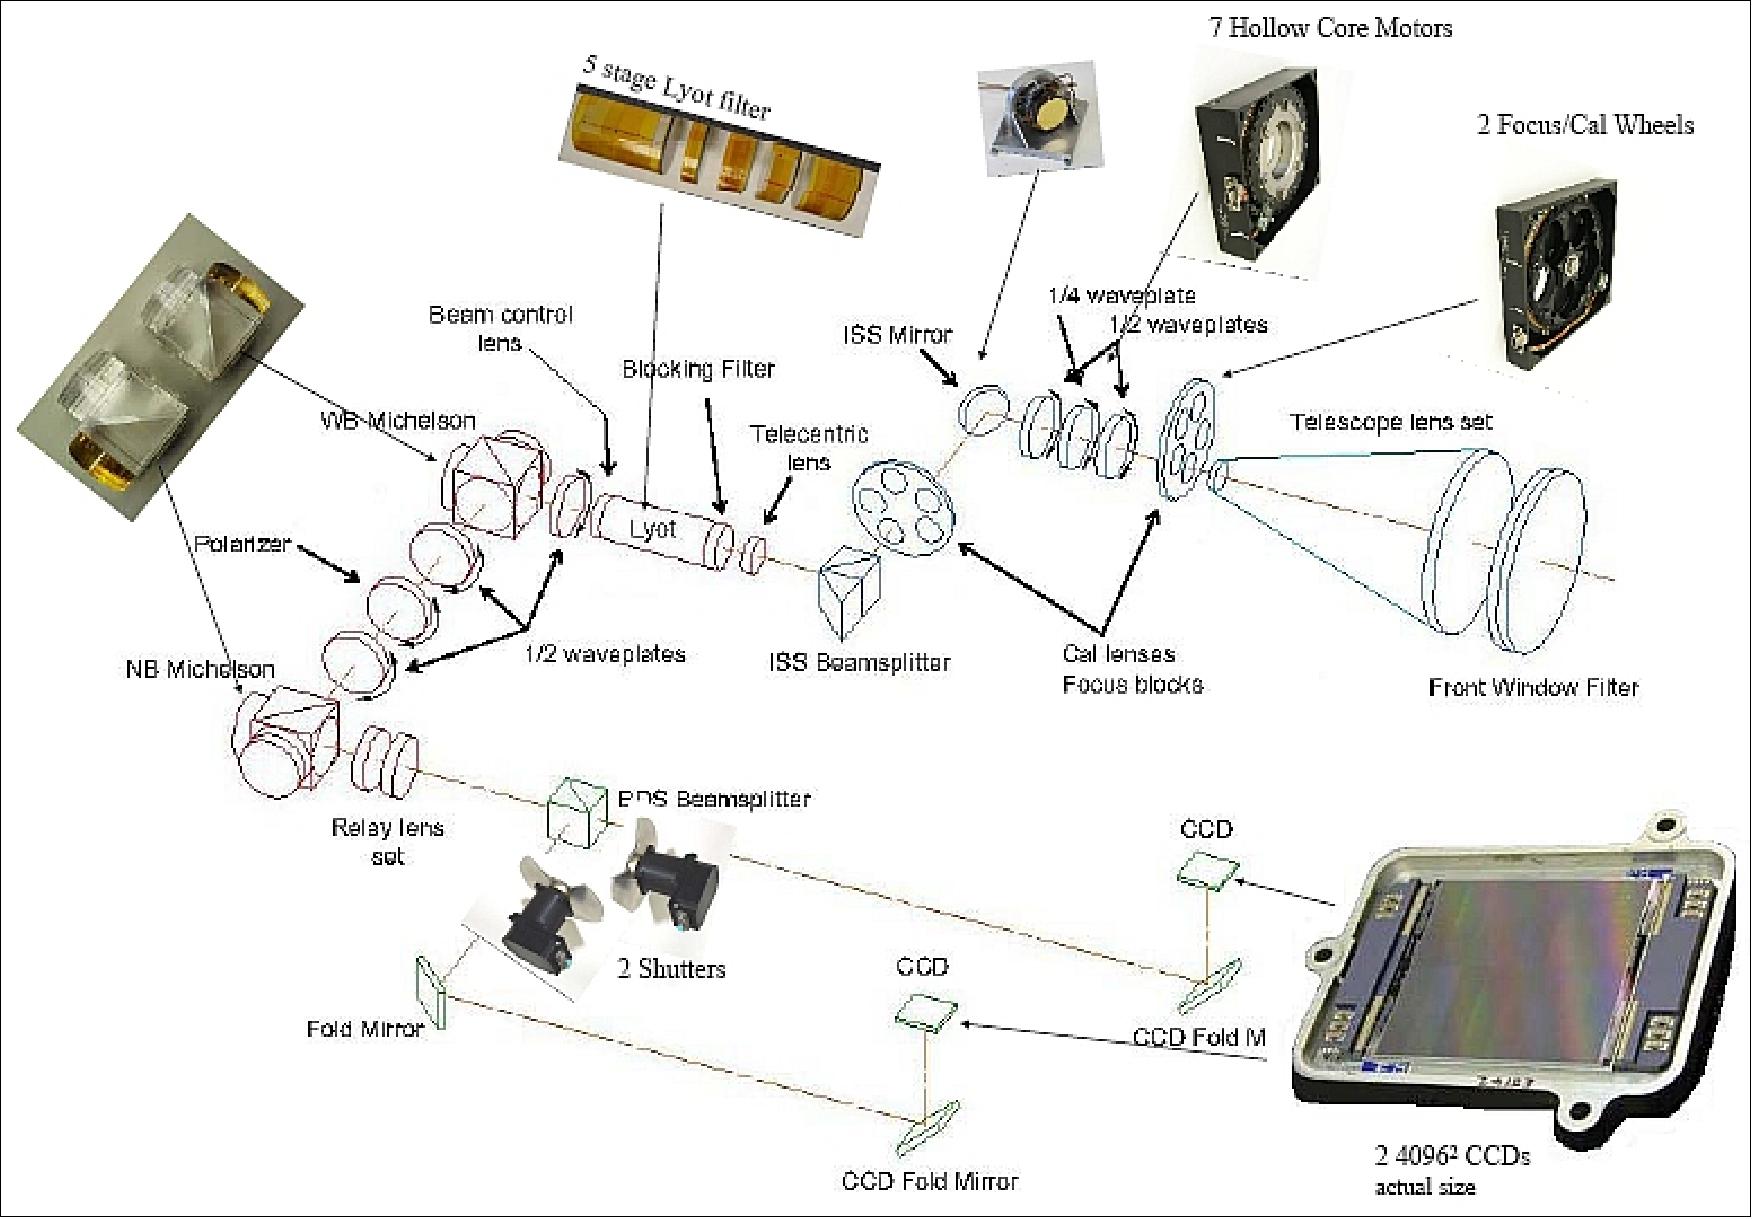 Figure 40: Optical layout of the HMI instrument (image credit: Stanford University)